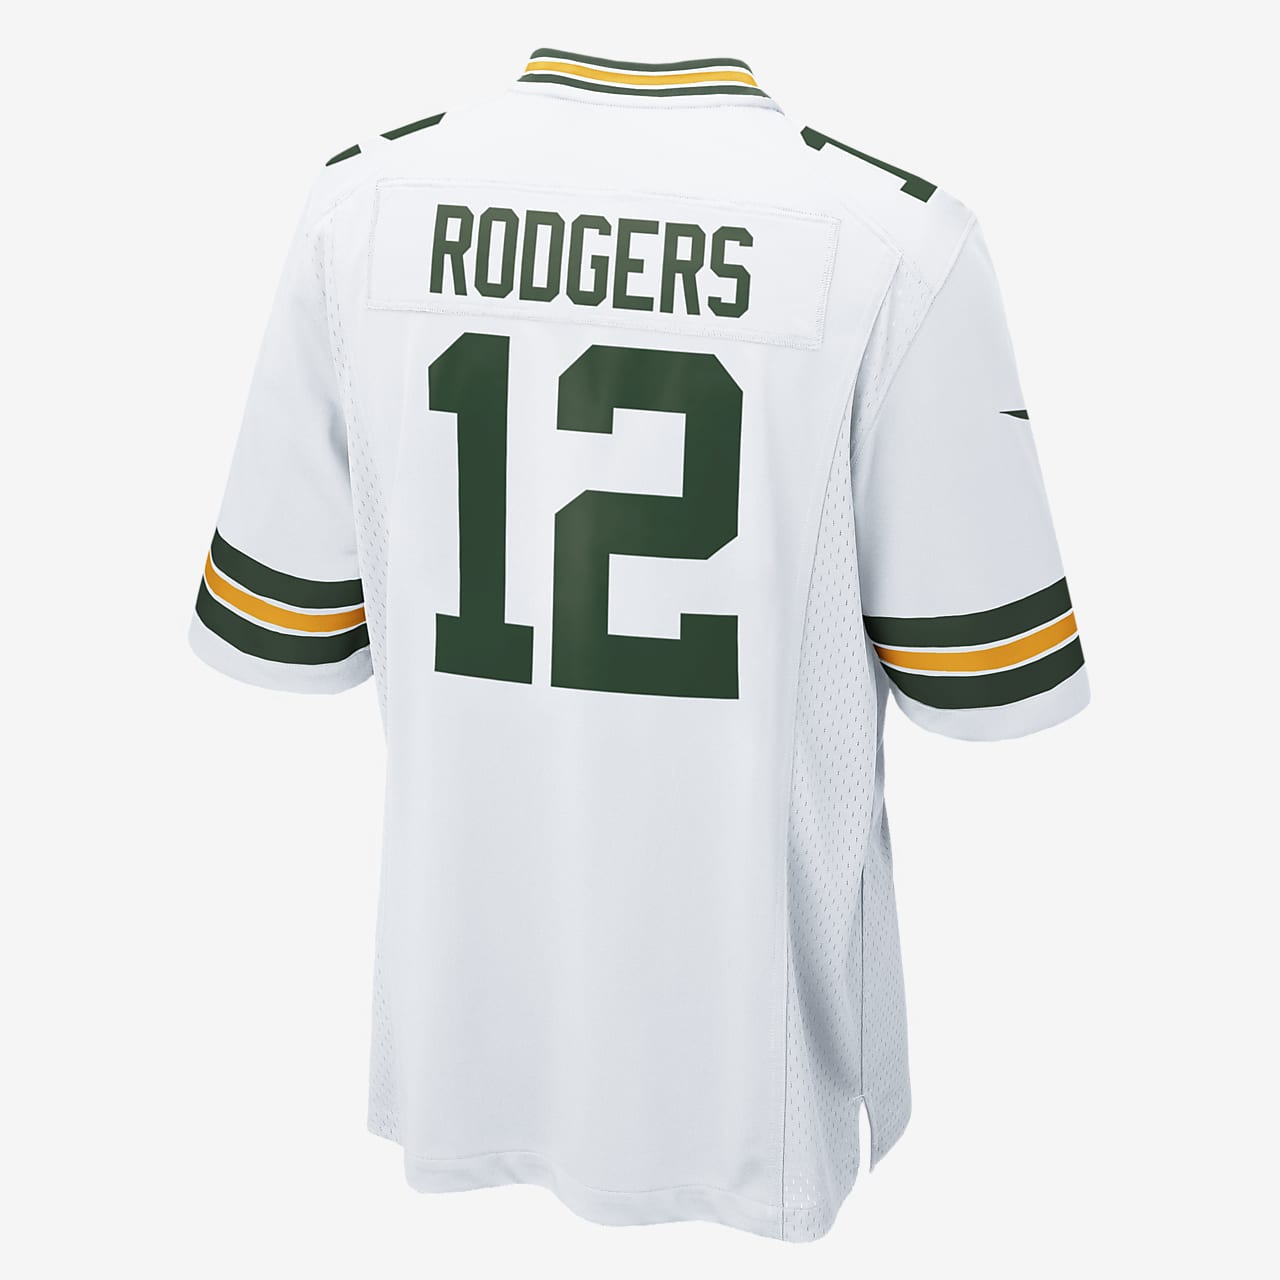 NFL Green Bay Packers (Aaron Rodgers) Men's Game Football Jersey